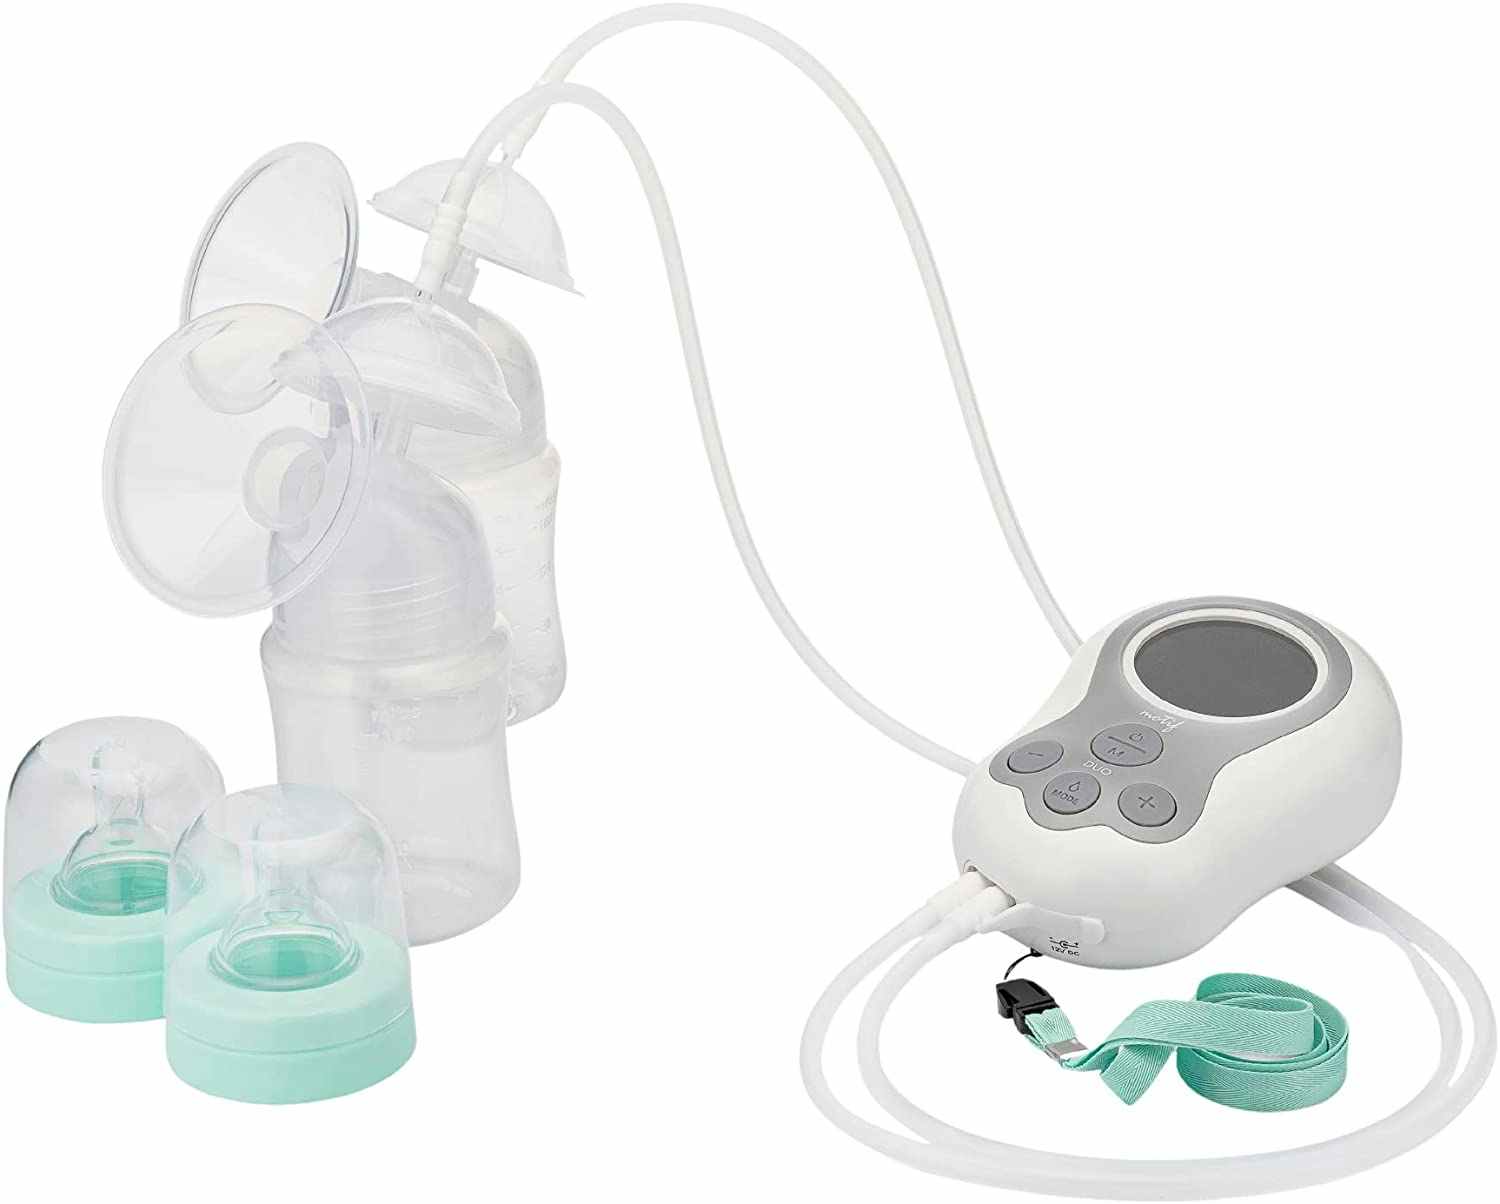 A Motif Duo breast pump on a white background.